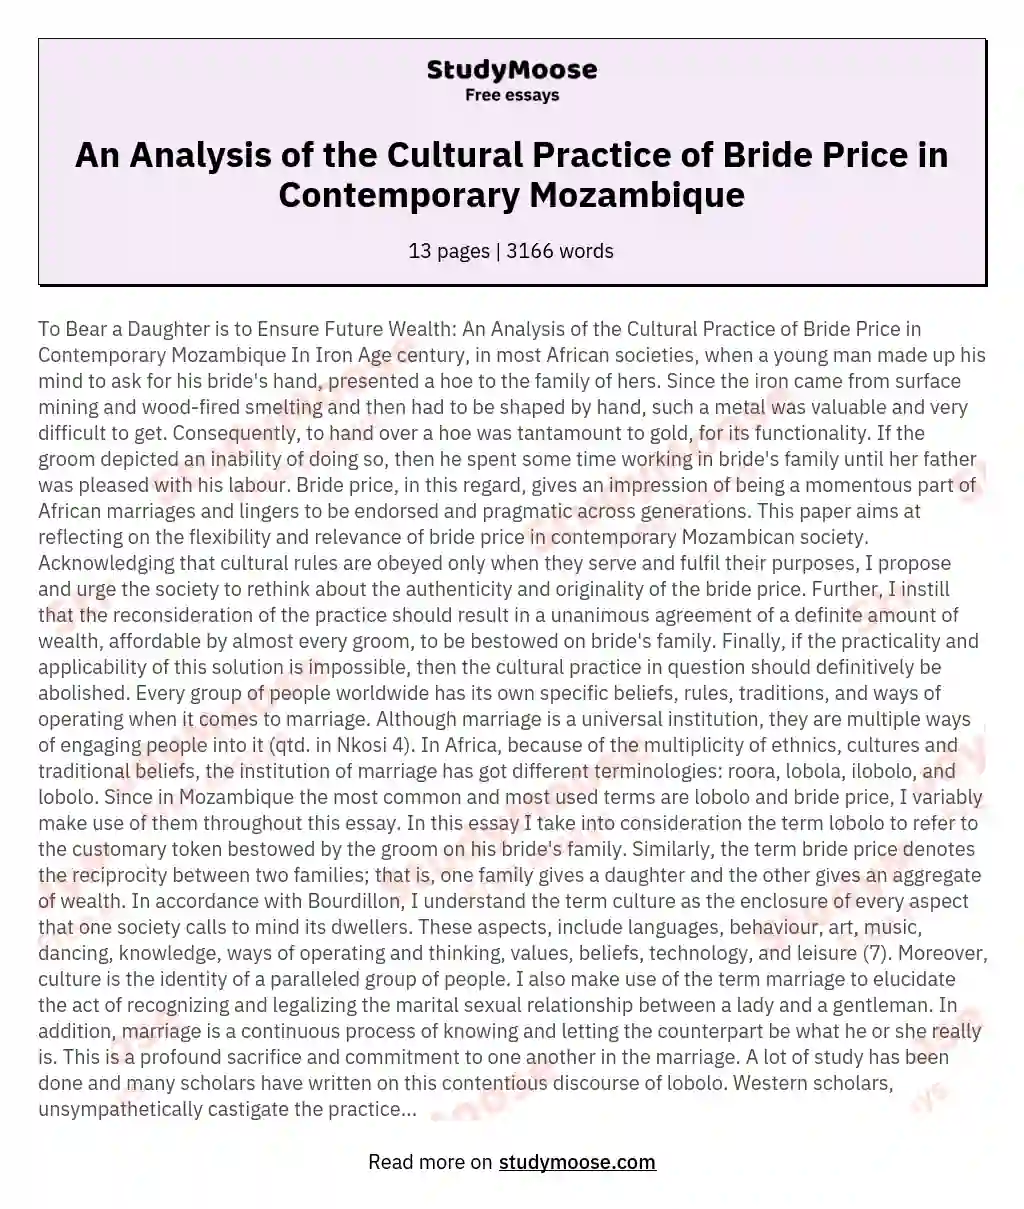 An Analysis of the Cultural Practice of Bride Price in Contemporary Mozambique essay